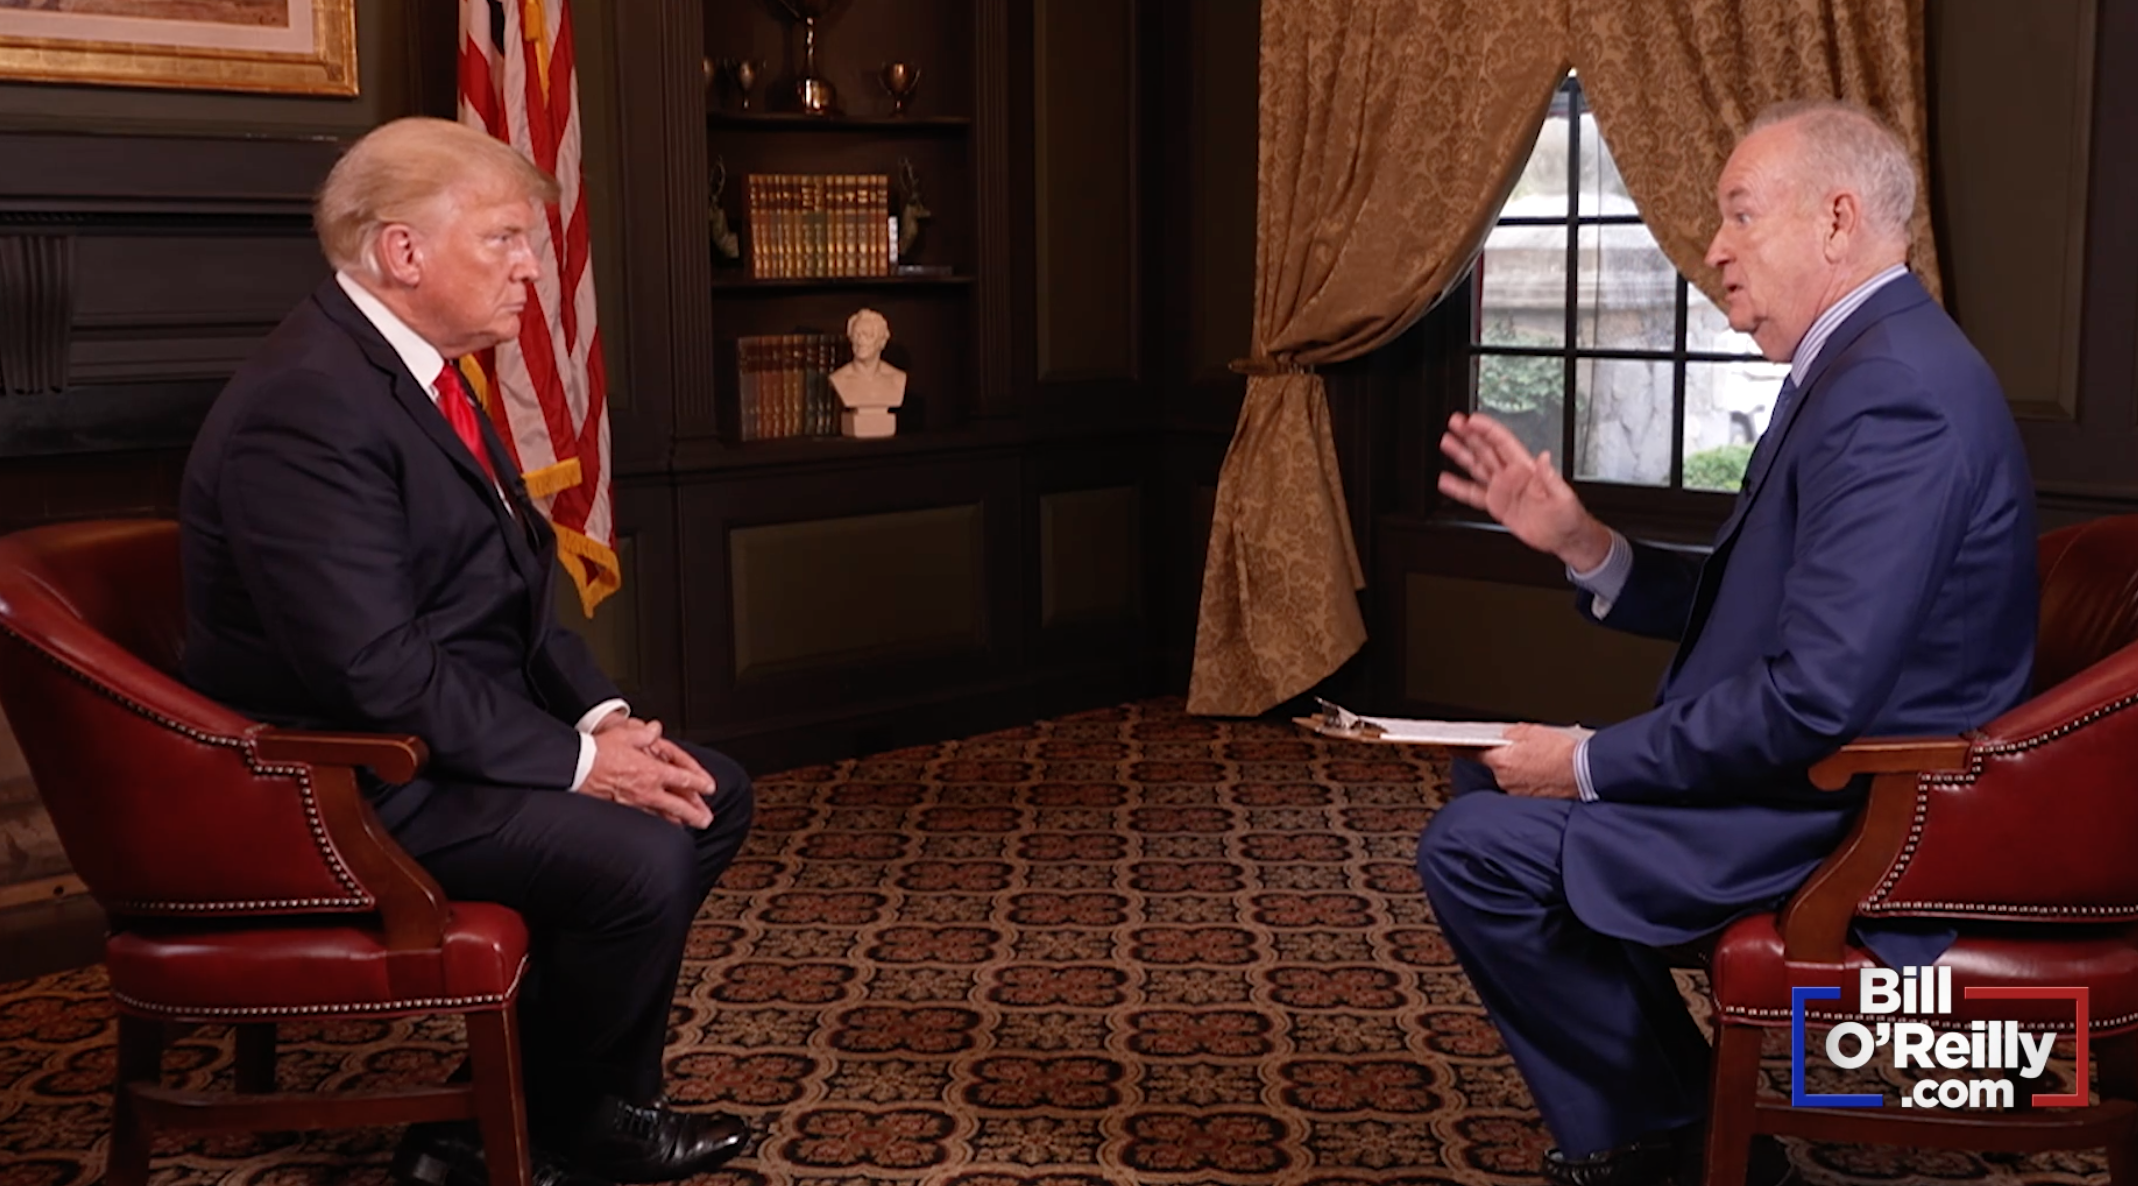 Watch the First Two Minutes of O'Reilly's Interview with President Trump